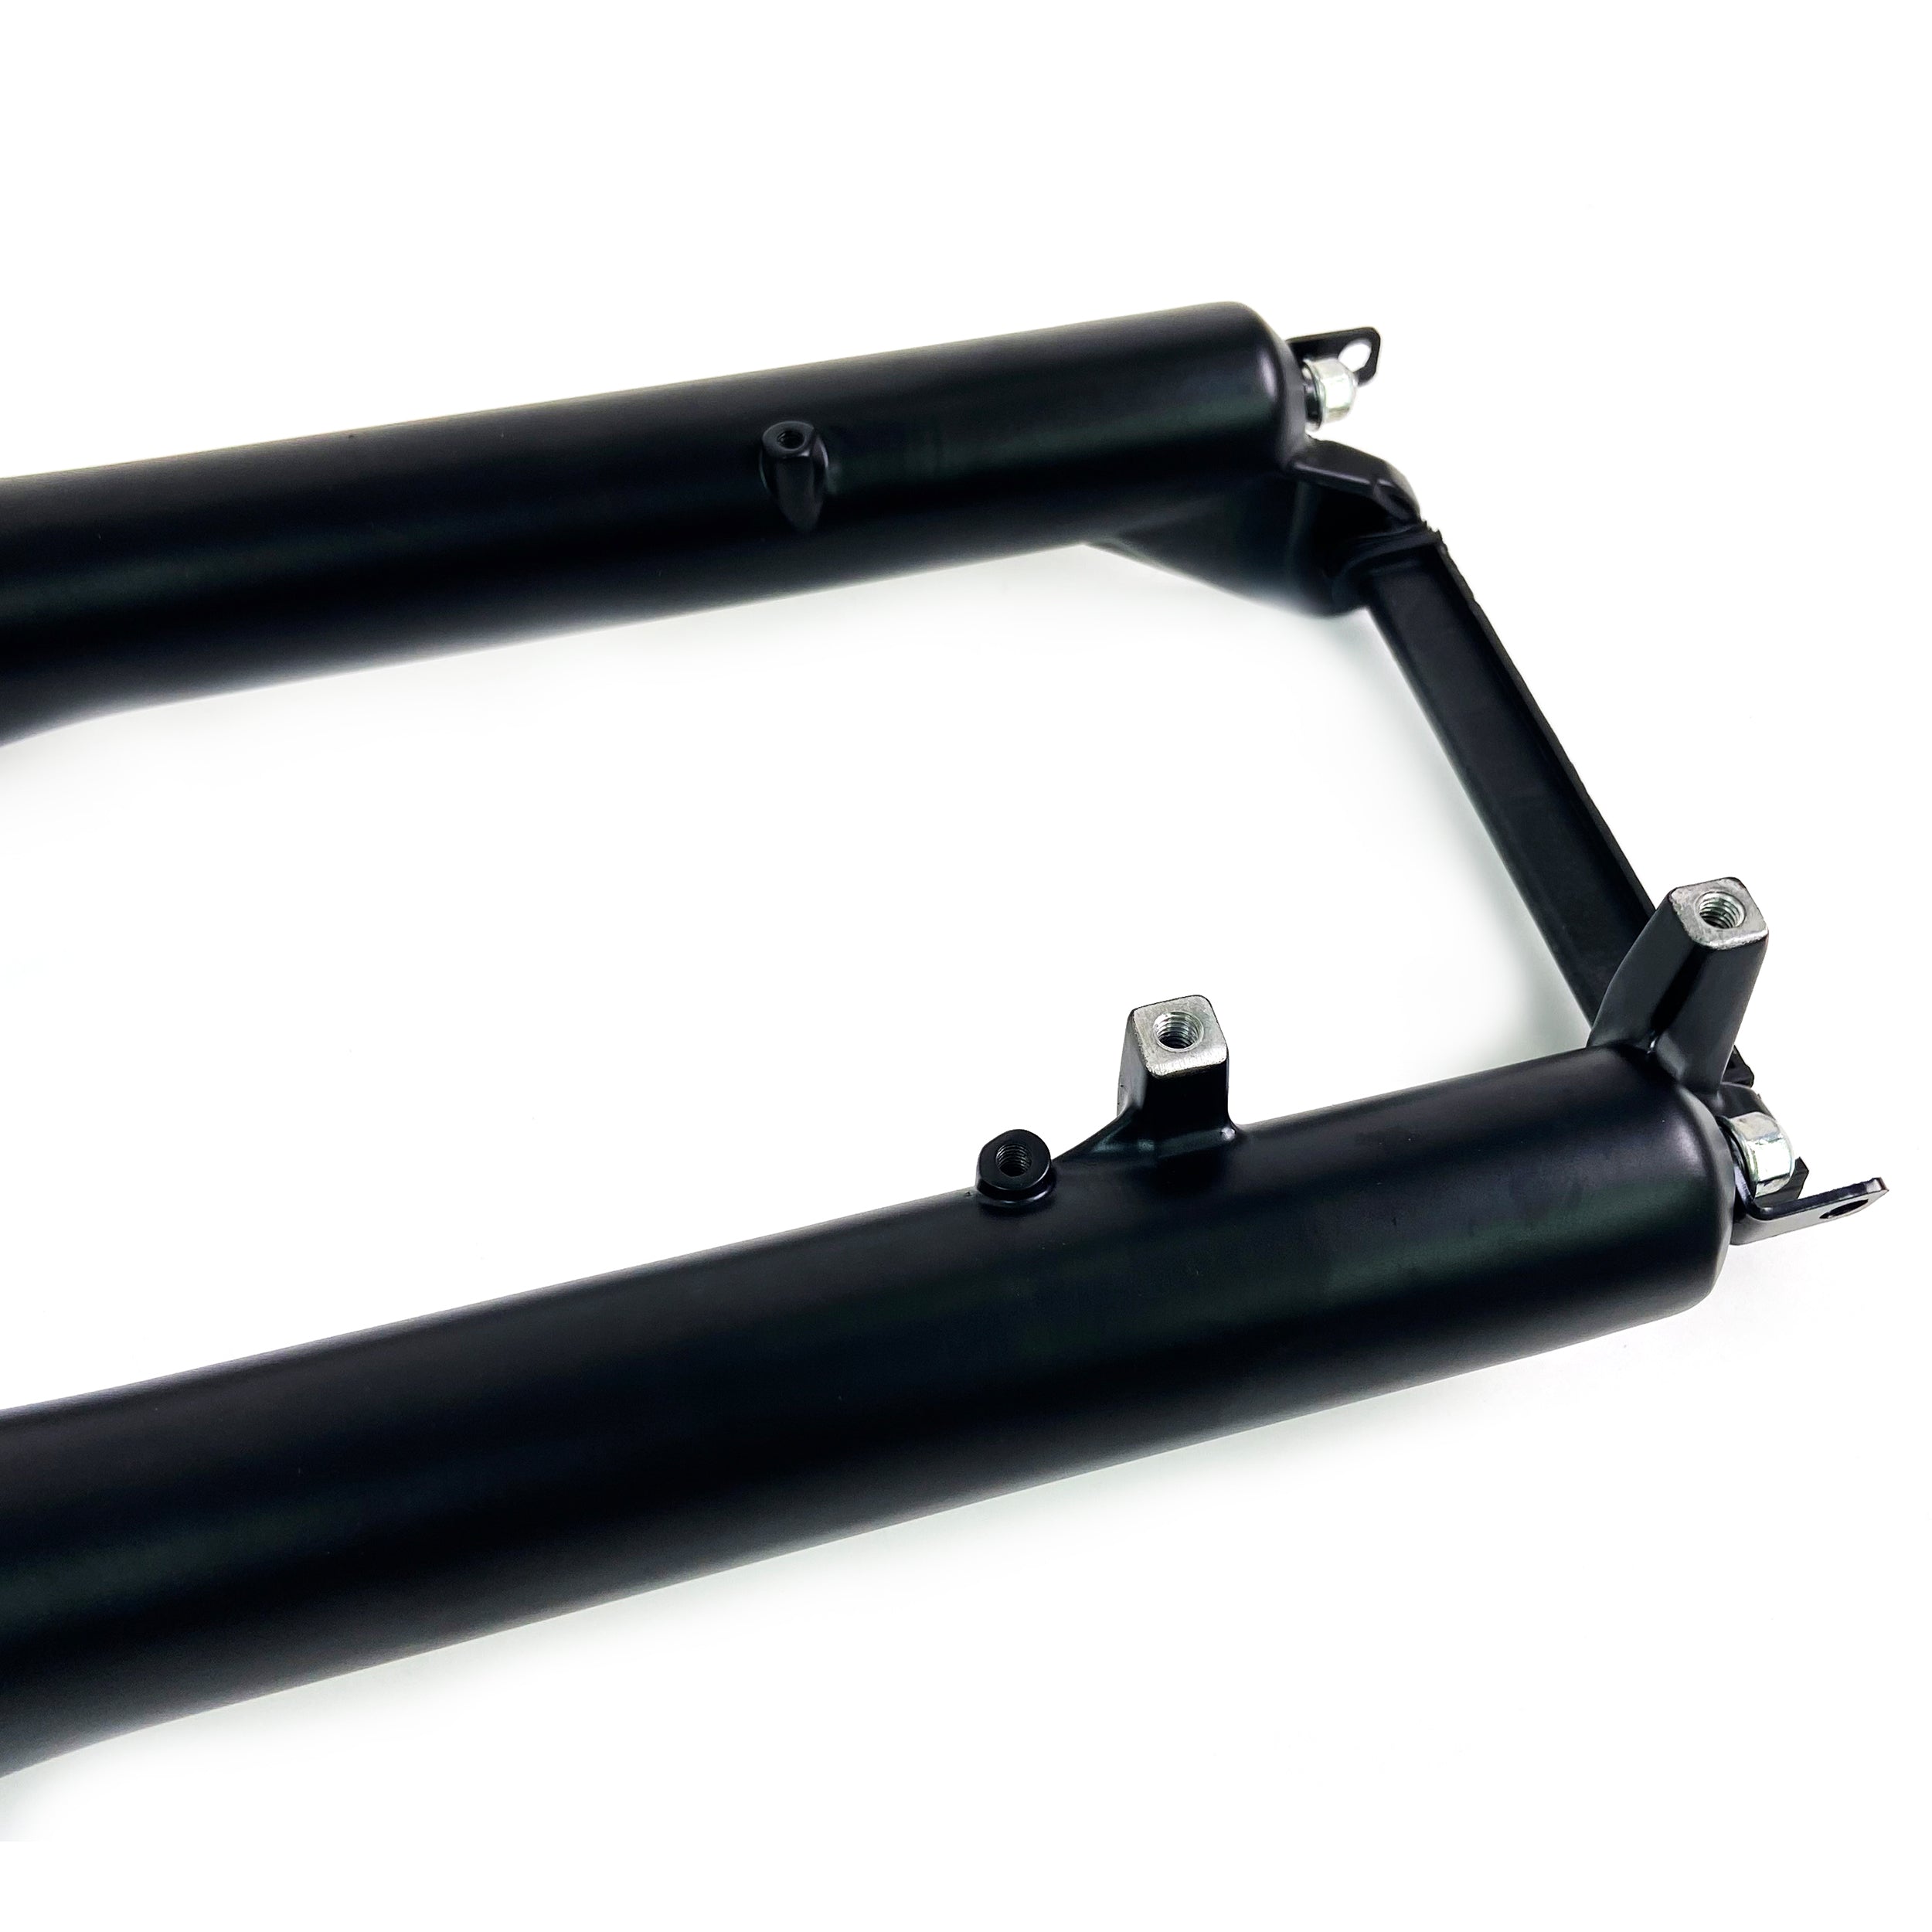 FRONT FORK FOR COSWHEEL EBIKE